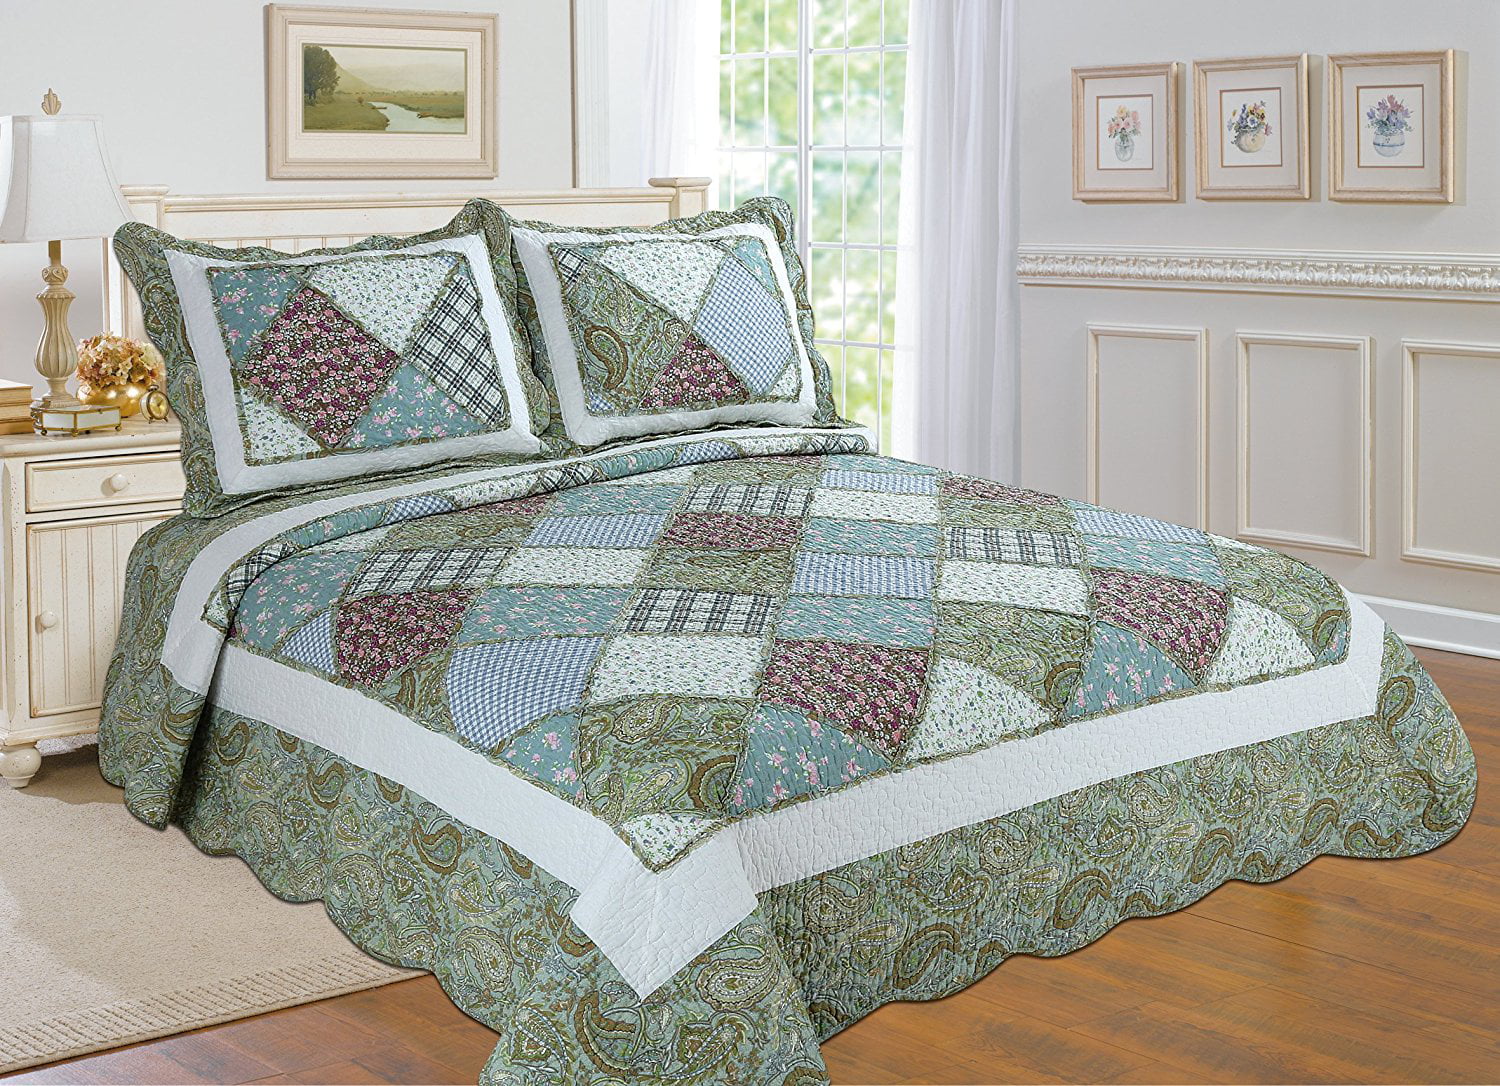 Details about   Embroidered flower COMFORTER REVERSIBLE set FULL SIZE Perfect gift & decoration